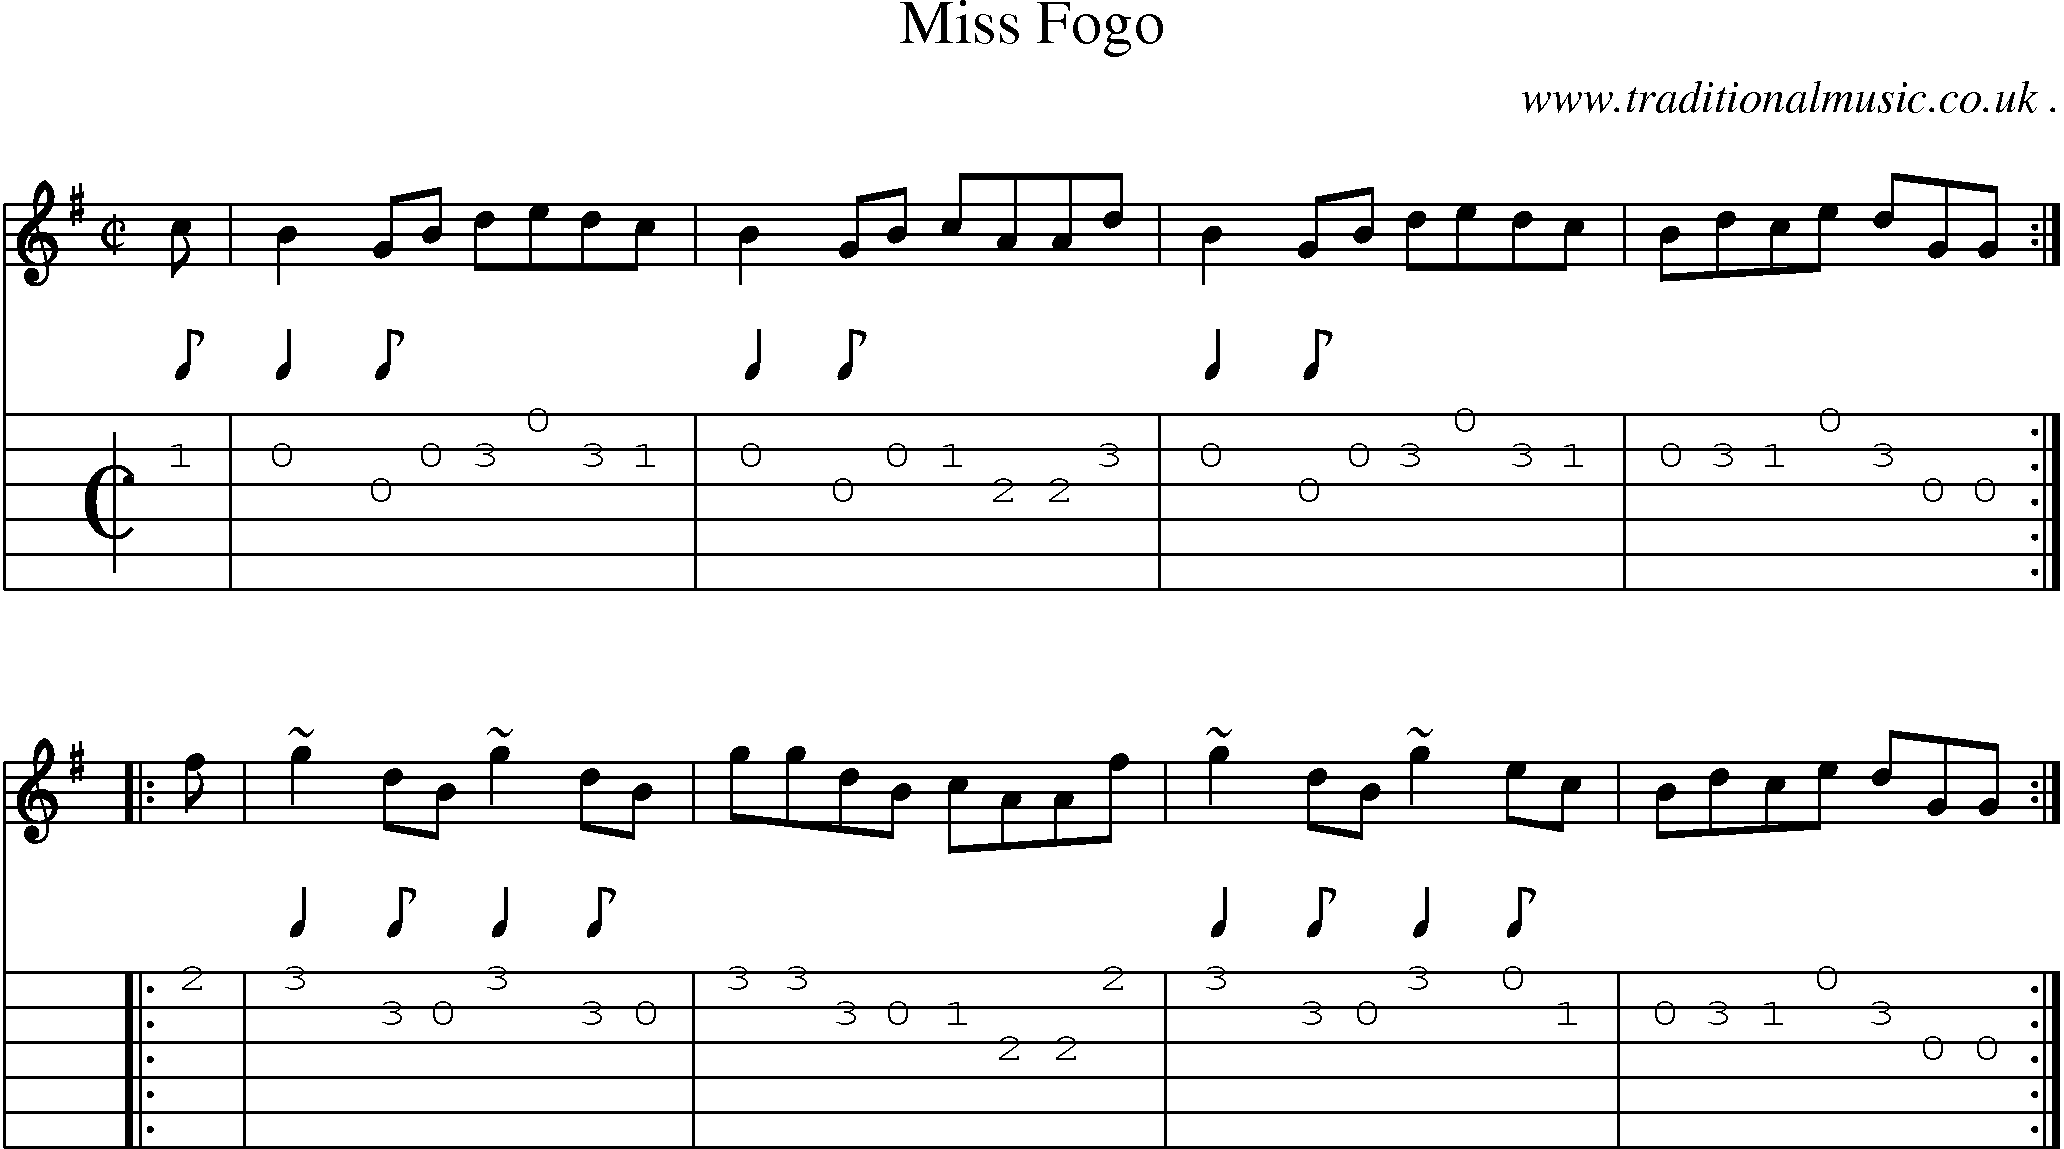 Sheet-music  score, Chords and Guitar Tabs for Miss Fogo